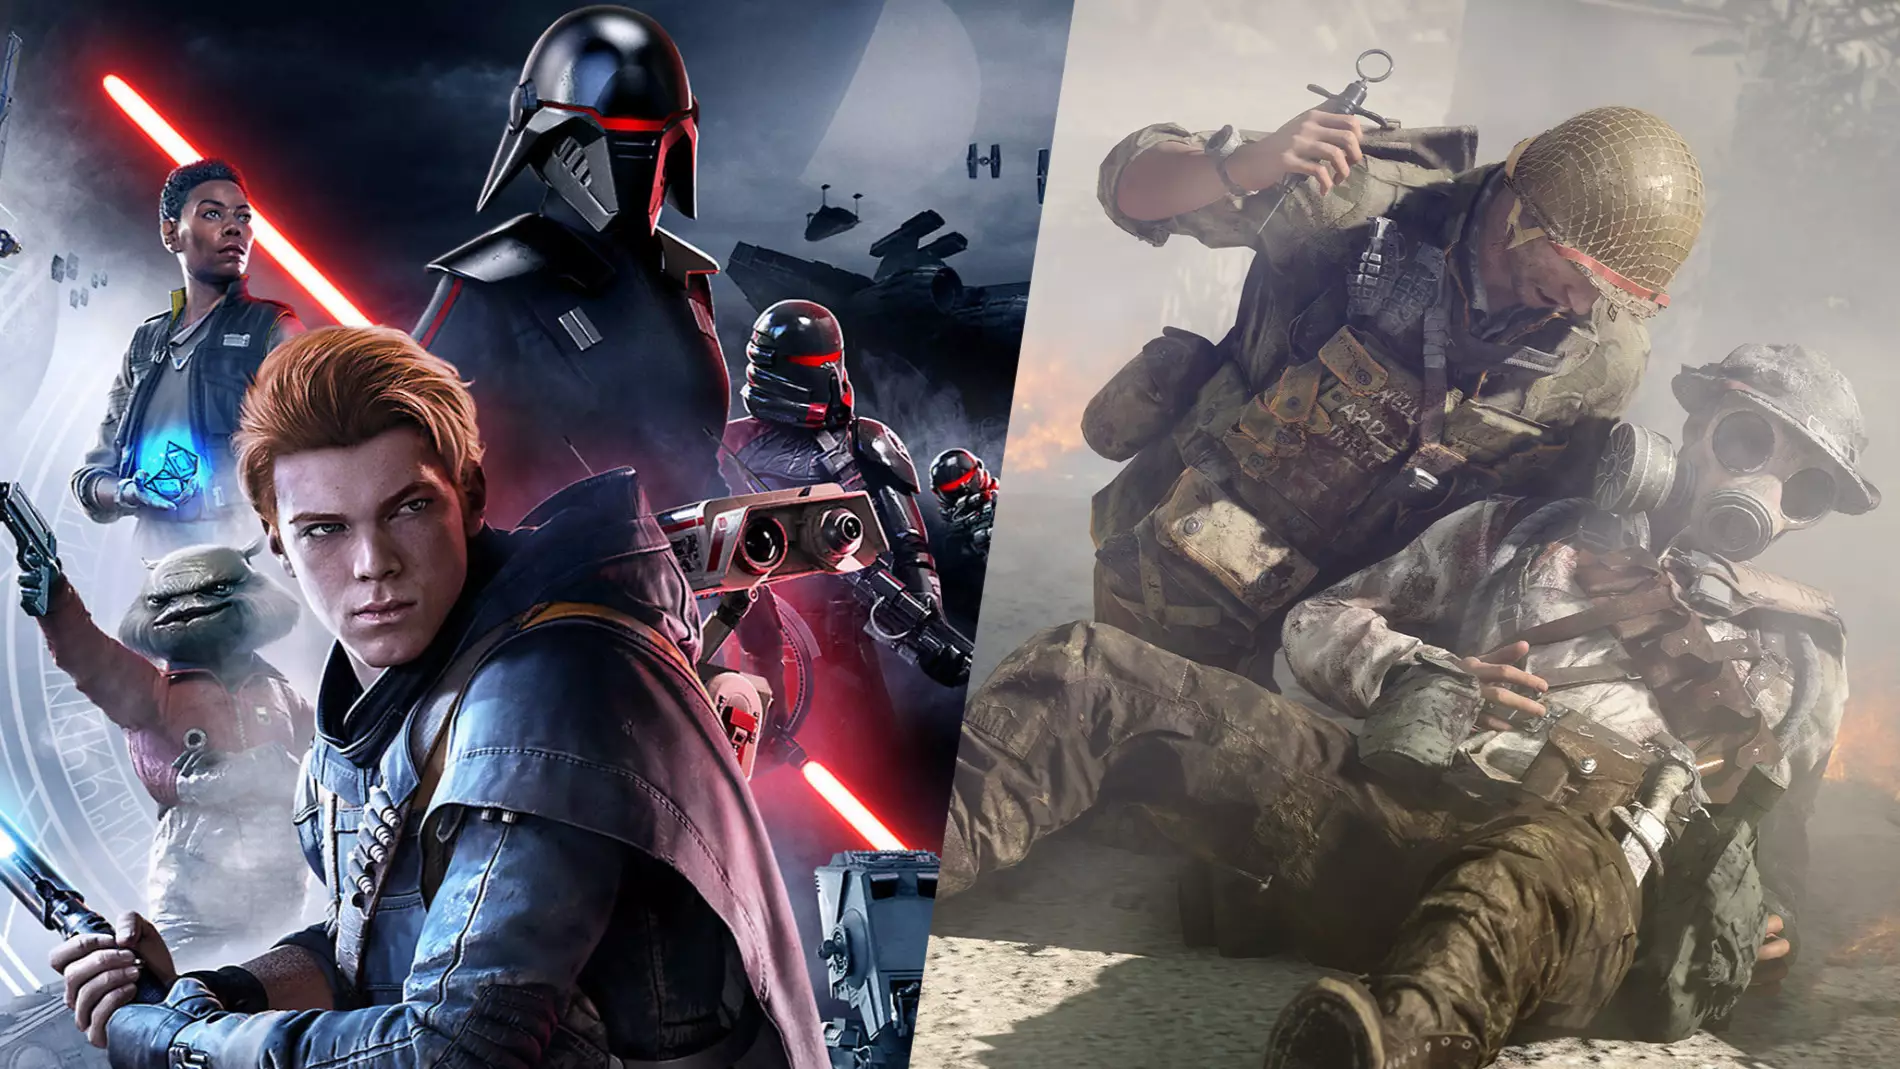 EA Made Nearly $1 Billion From Microtransactions In Just Three Months